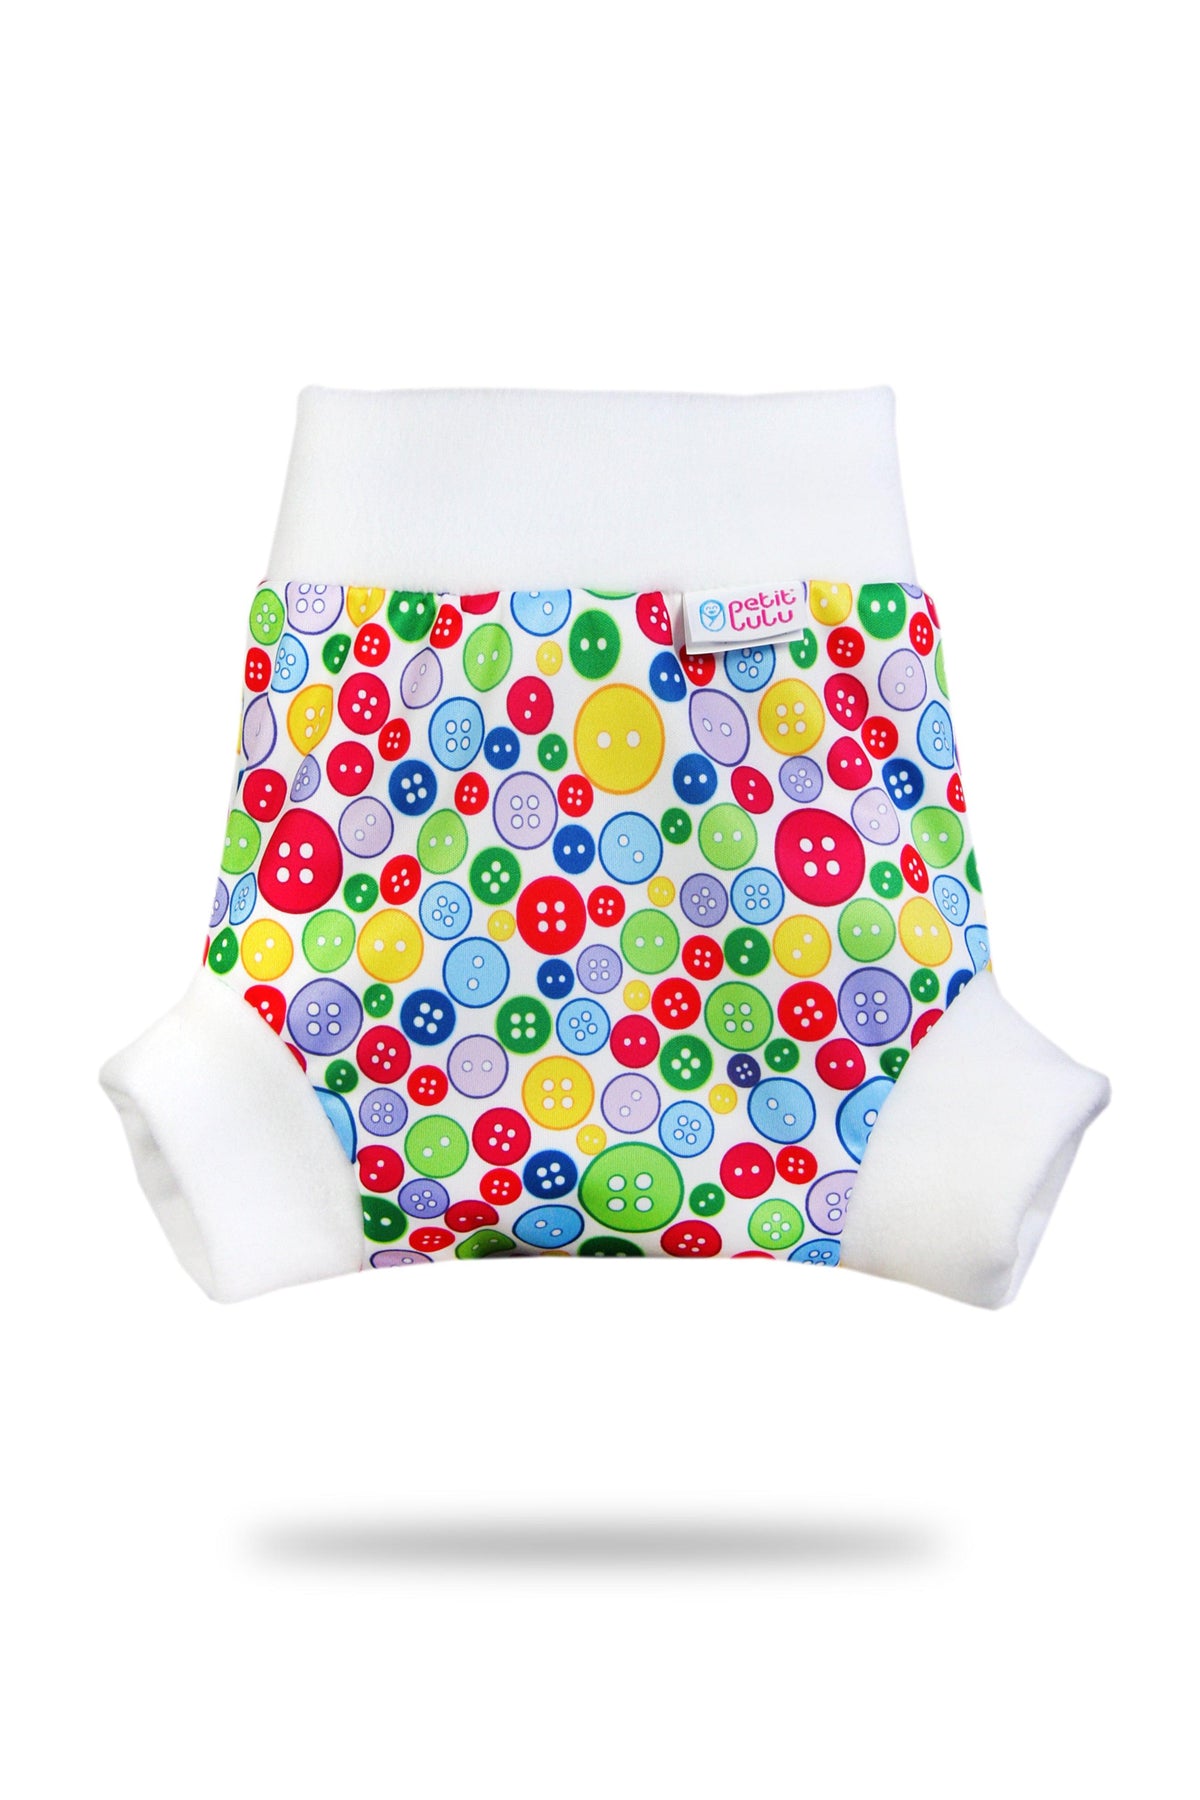 Petit Lulu | Couvre-couche Pull-Up | Sewing Buttons (LIQUIDATION VENTE FINALE) - Petit Lulu